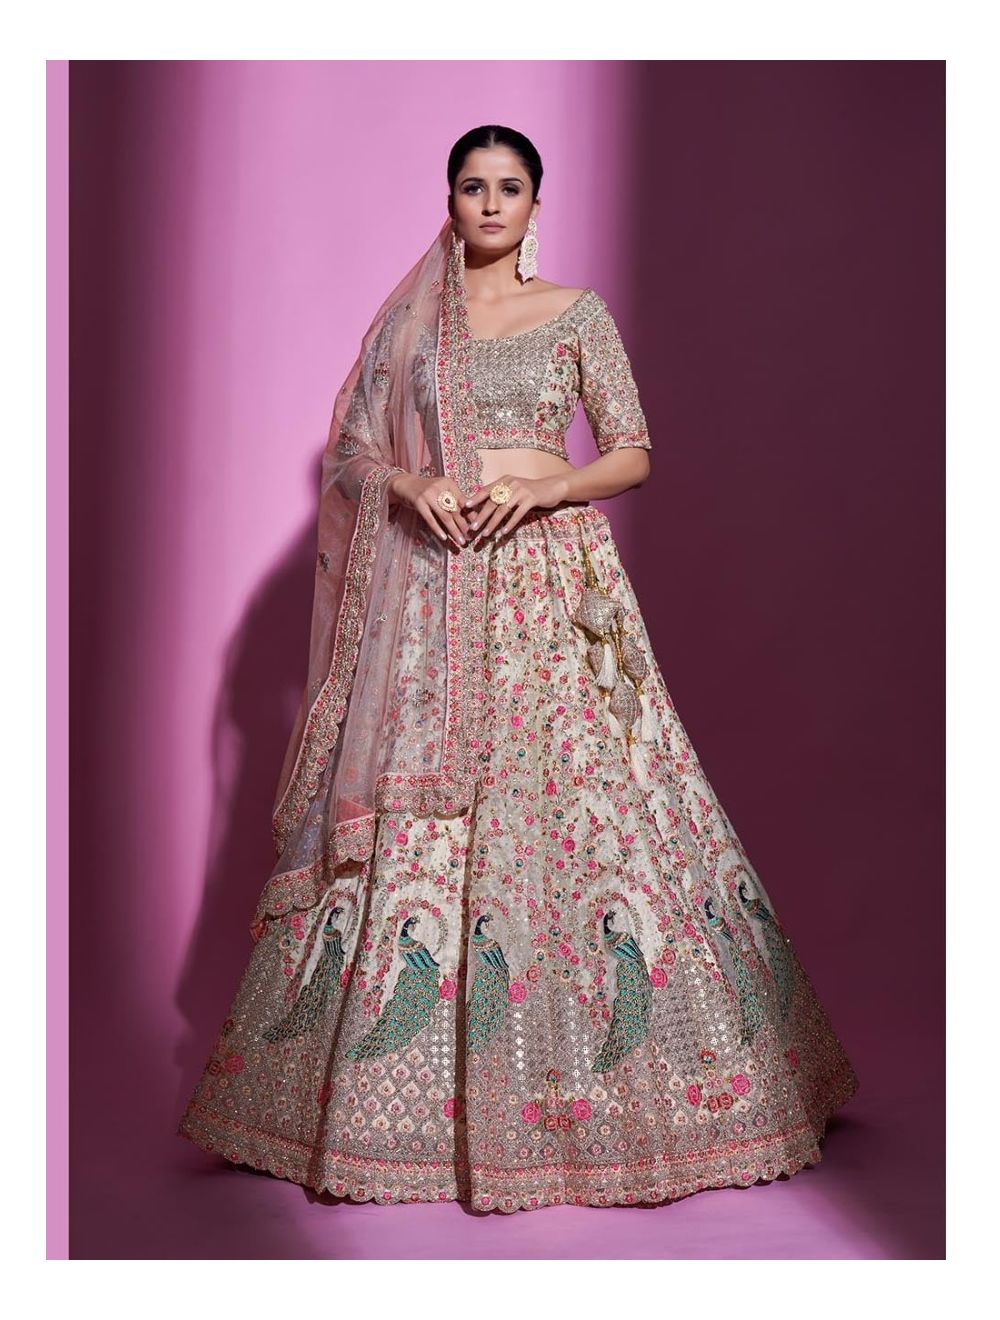 Party Wear Indian Lehengas: Styles, Colors, and Trends